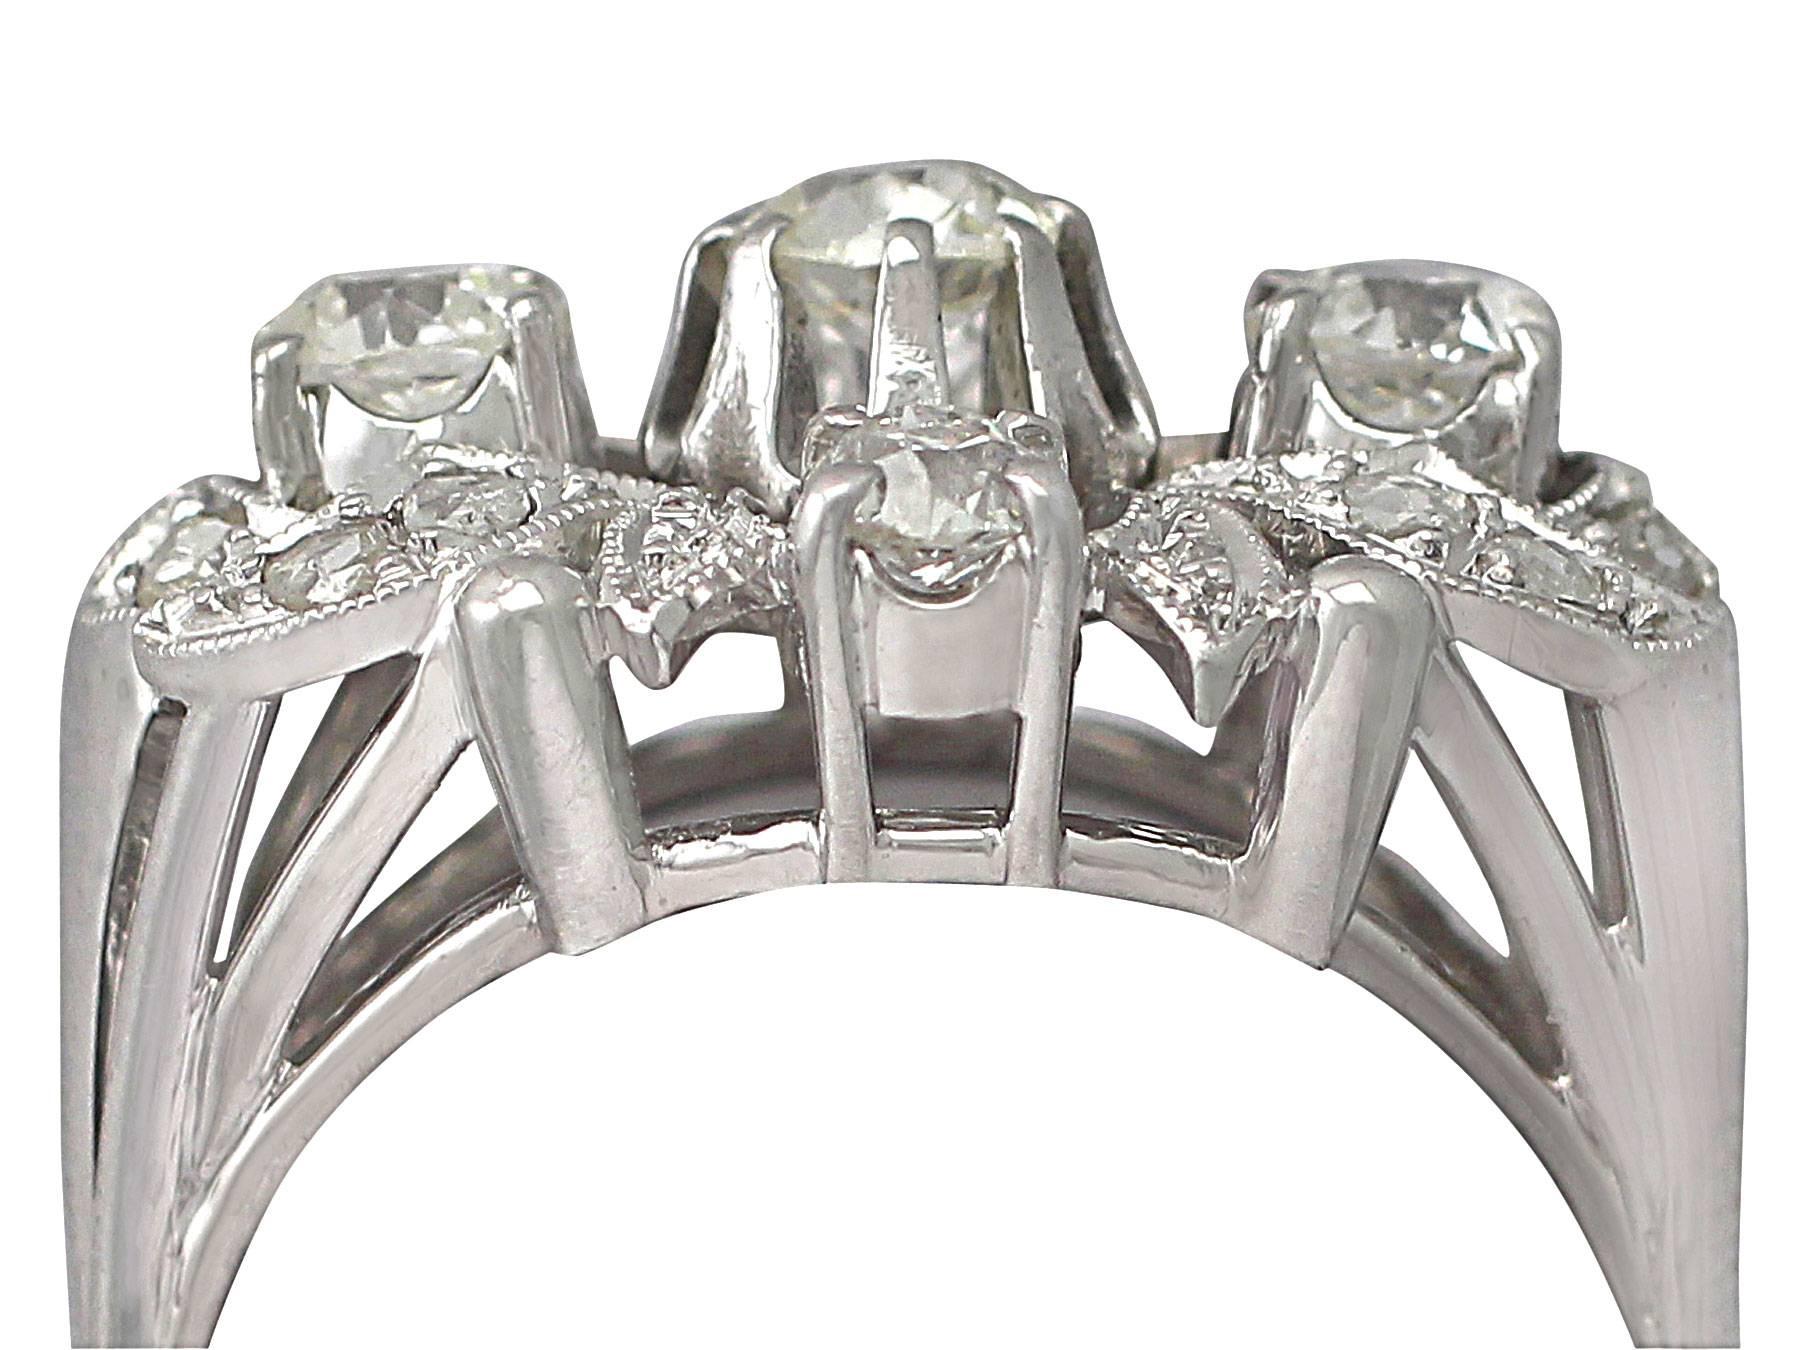 A stunning, fine and impressive antique Belgian 2.07 carat diamond and 18 karat white gold cluster ring; part of our vintage jewelry and estate jewelry collections

This stunning vintage diamond dress ring has been crafted in 18k white